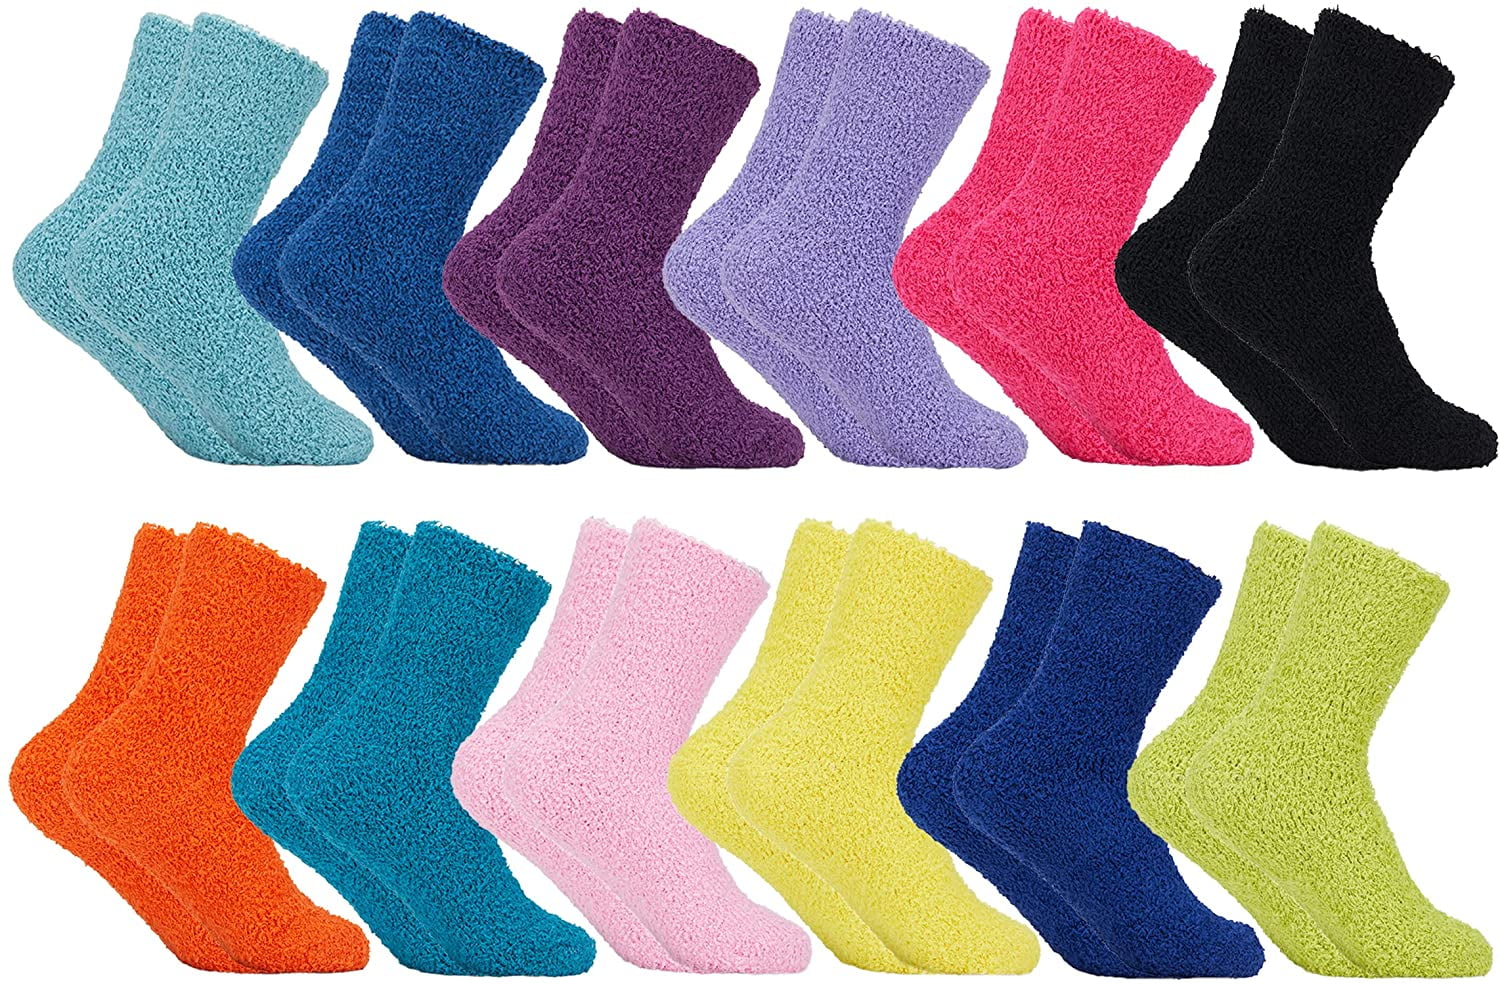 95% Cotton Quality “NEW” Grippers™ Pilates & Yoga Socks All Grip and Non-Slip 